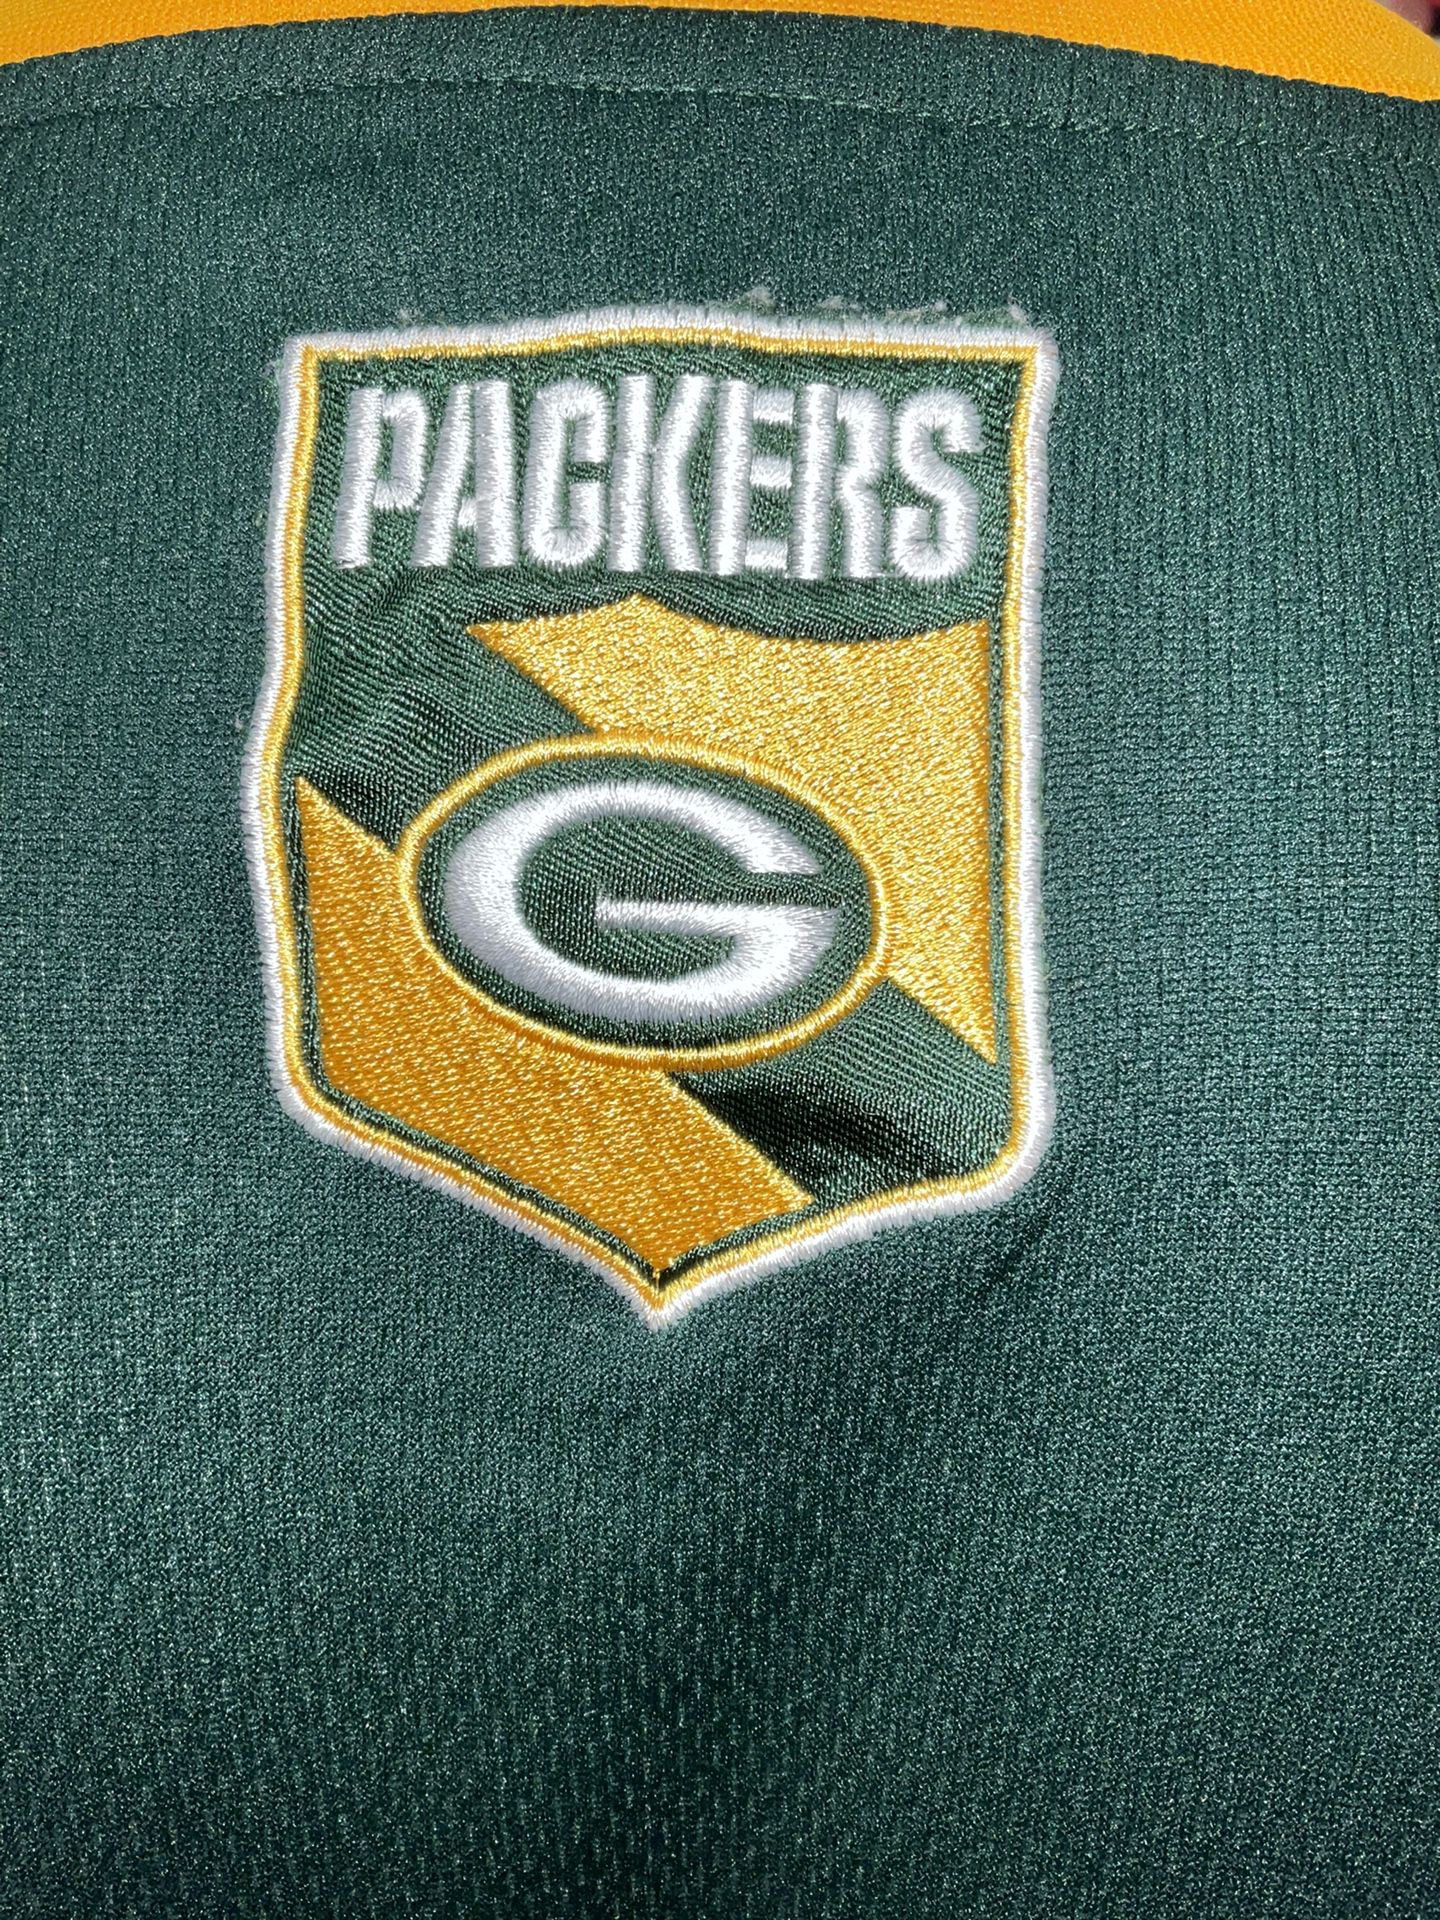 Green Bay Packers Jersey Womens sz 20 XL.  No apparent rips, tears or stains  Please see photos